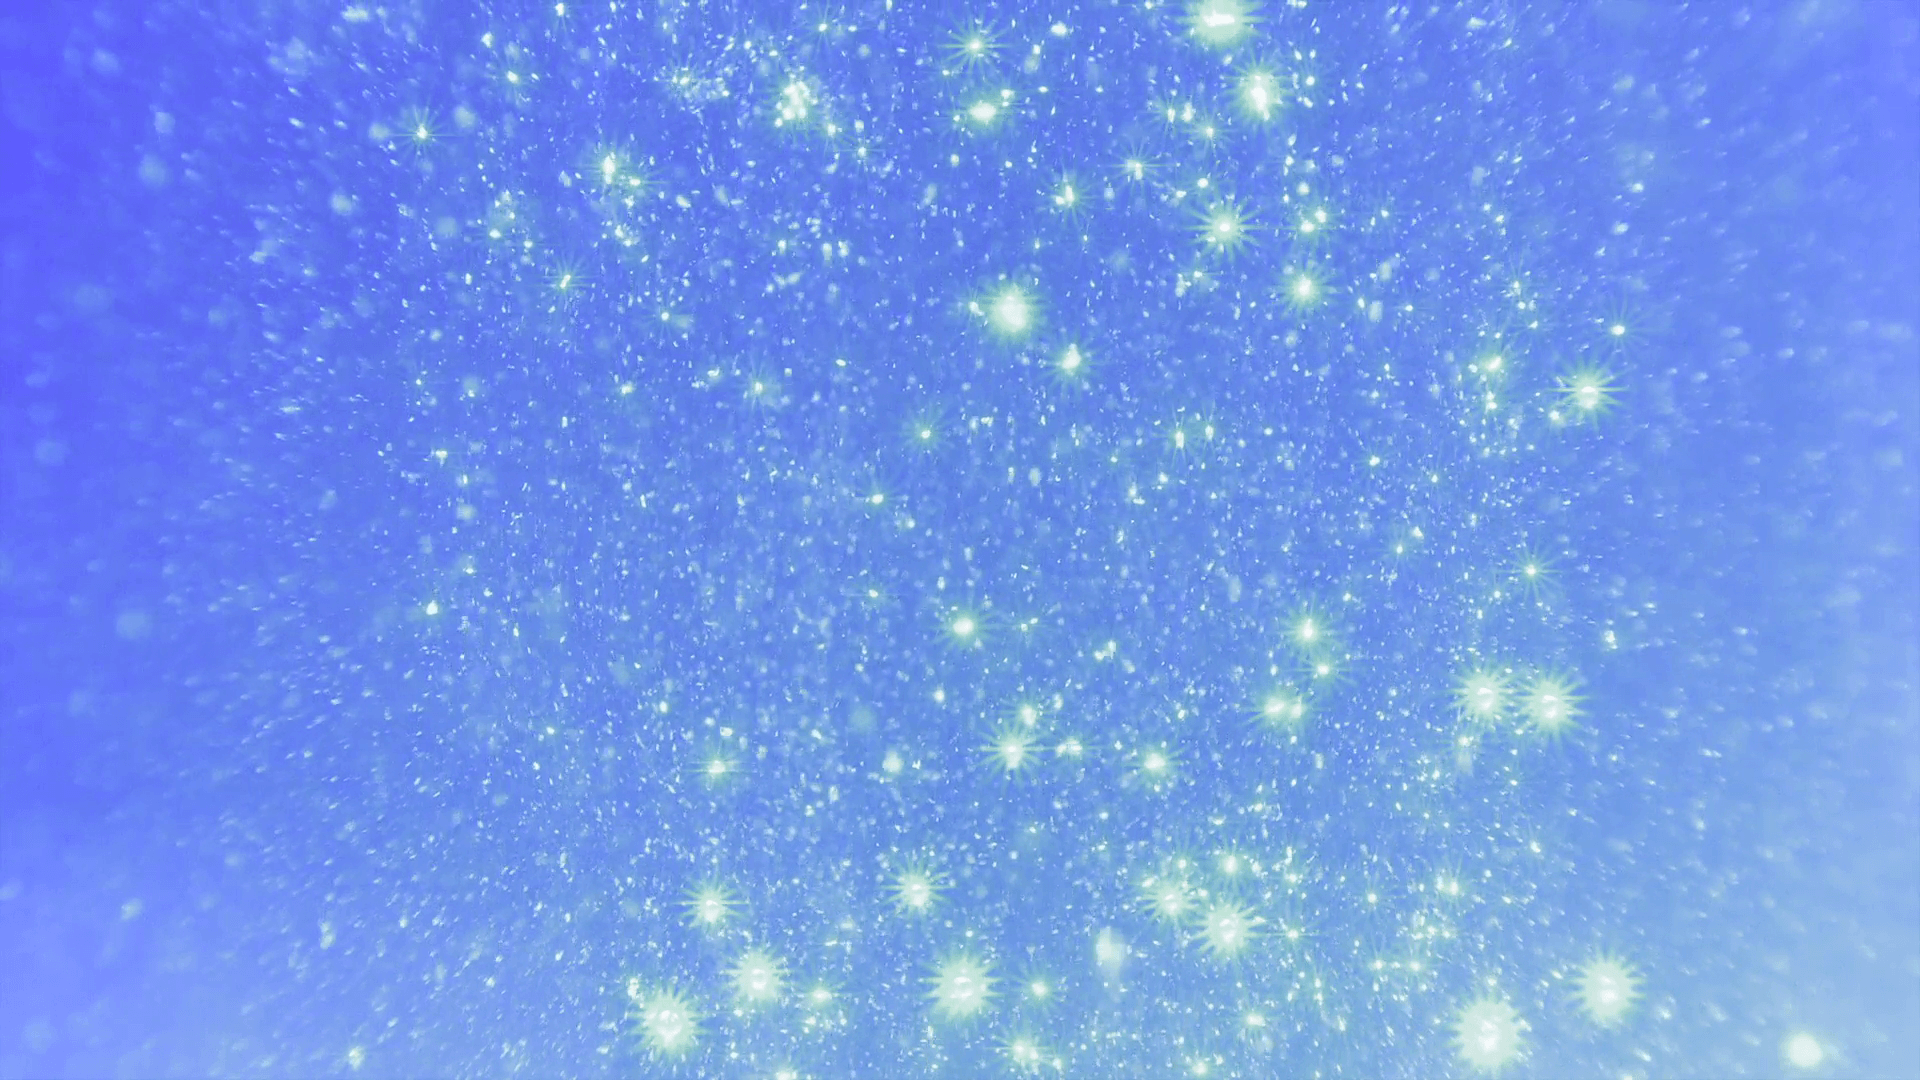 Magical sparks, bubbles, particles, light, stars floating on a blue